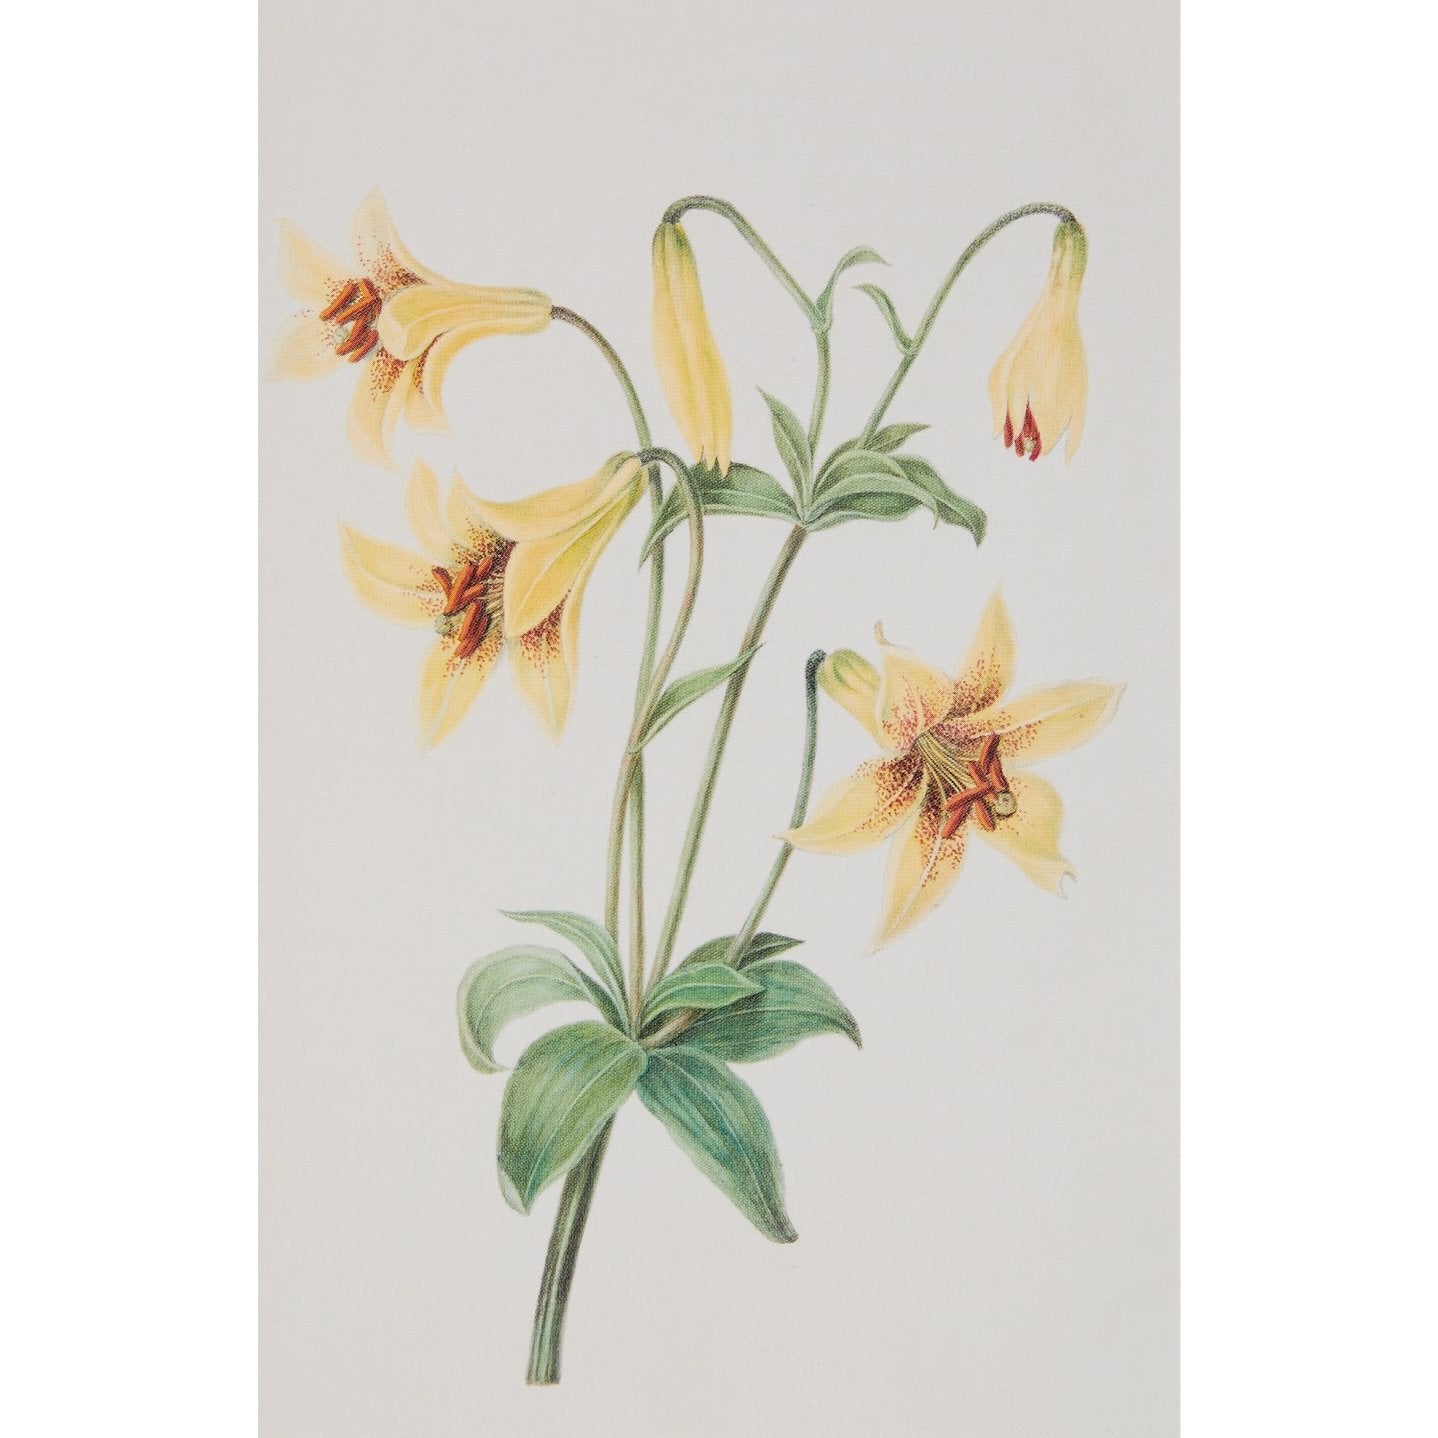 Notecard - Lily by the Hon Lady Cockerell. From the Broughton Collection of the Fitzwilliam Museum, brought to you by CuratingCambridge.co.uk